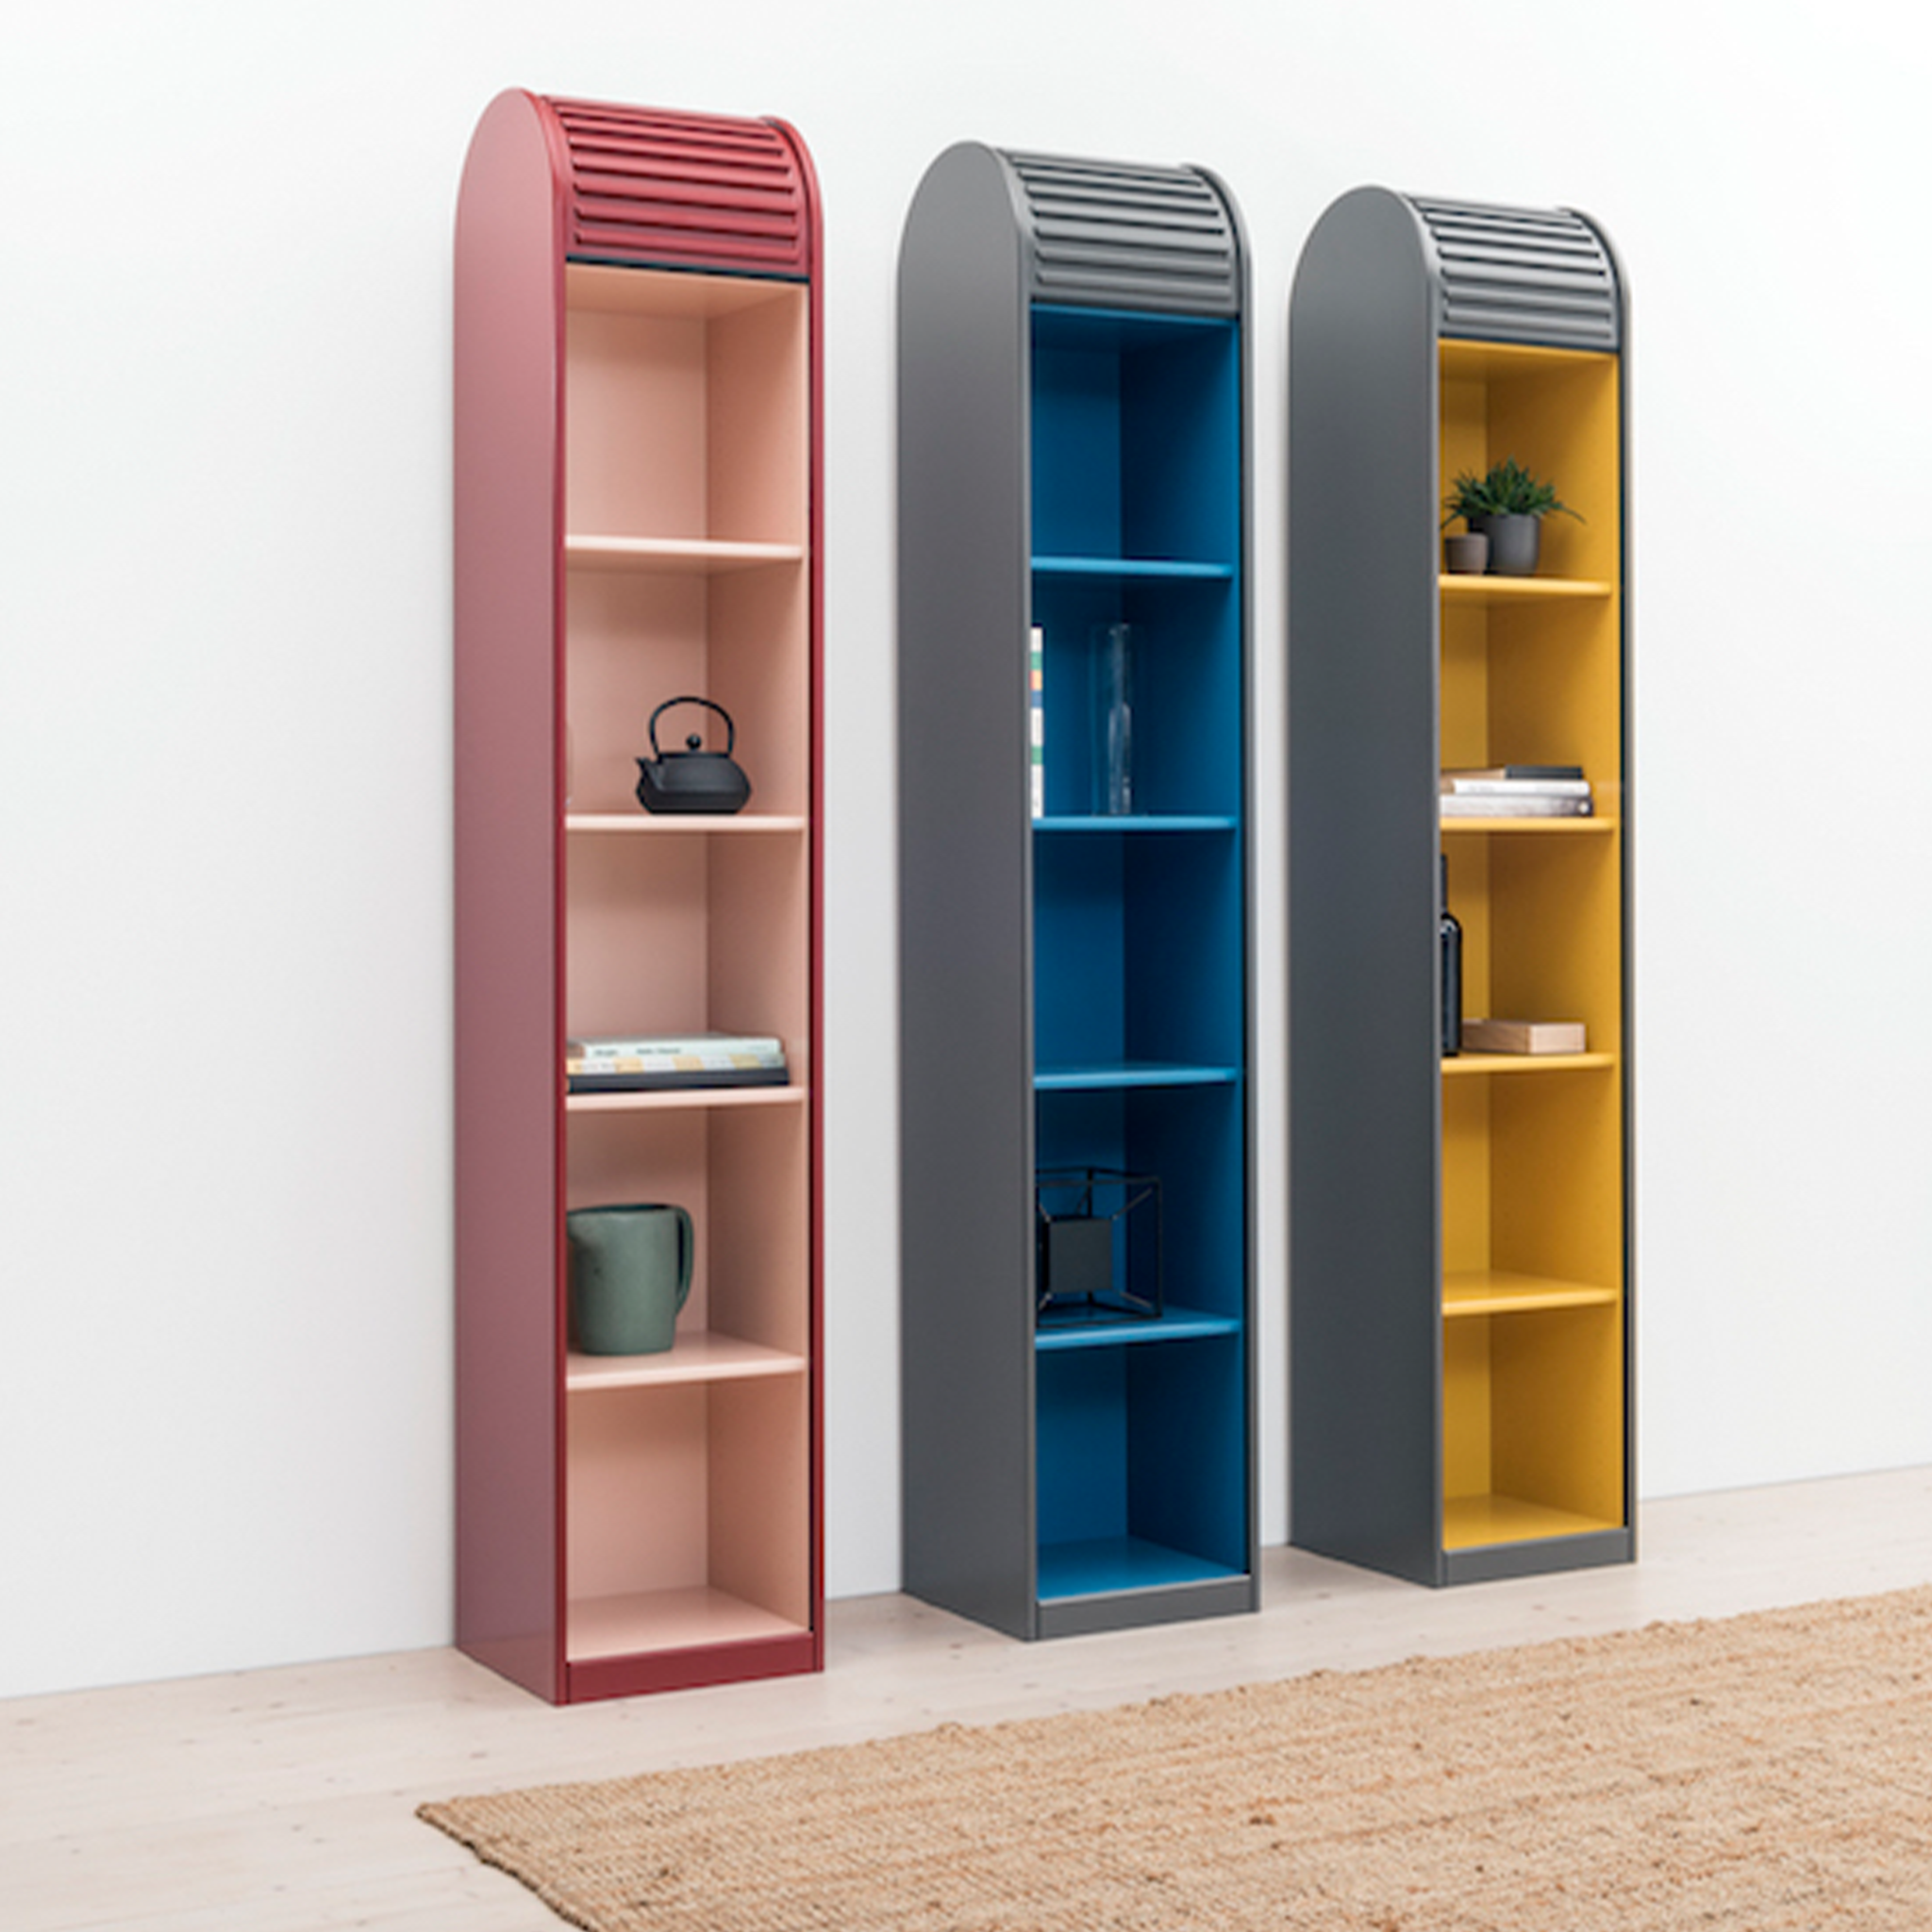 A'dammer Cabinet by Pastoe